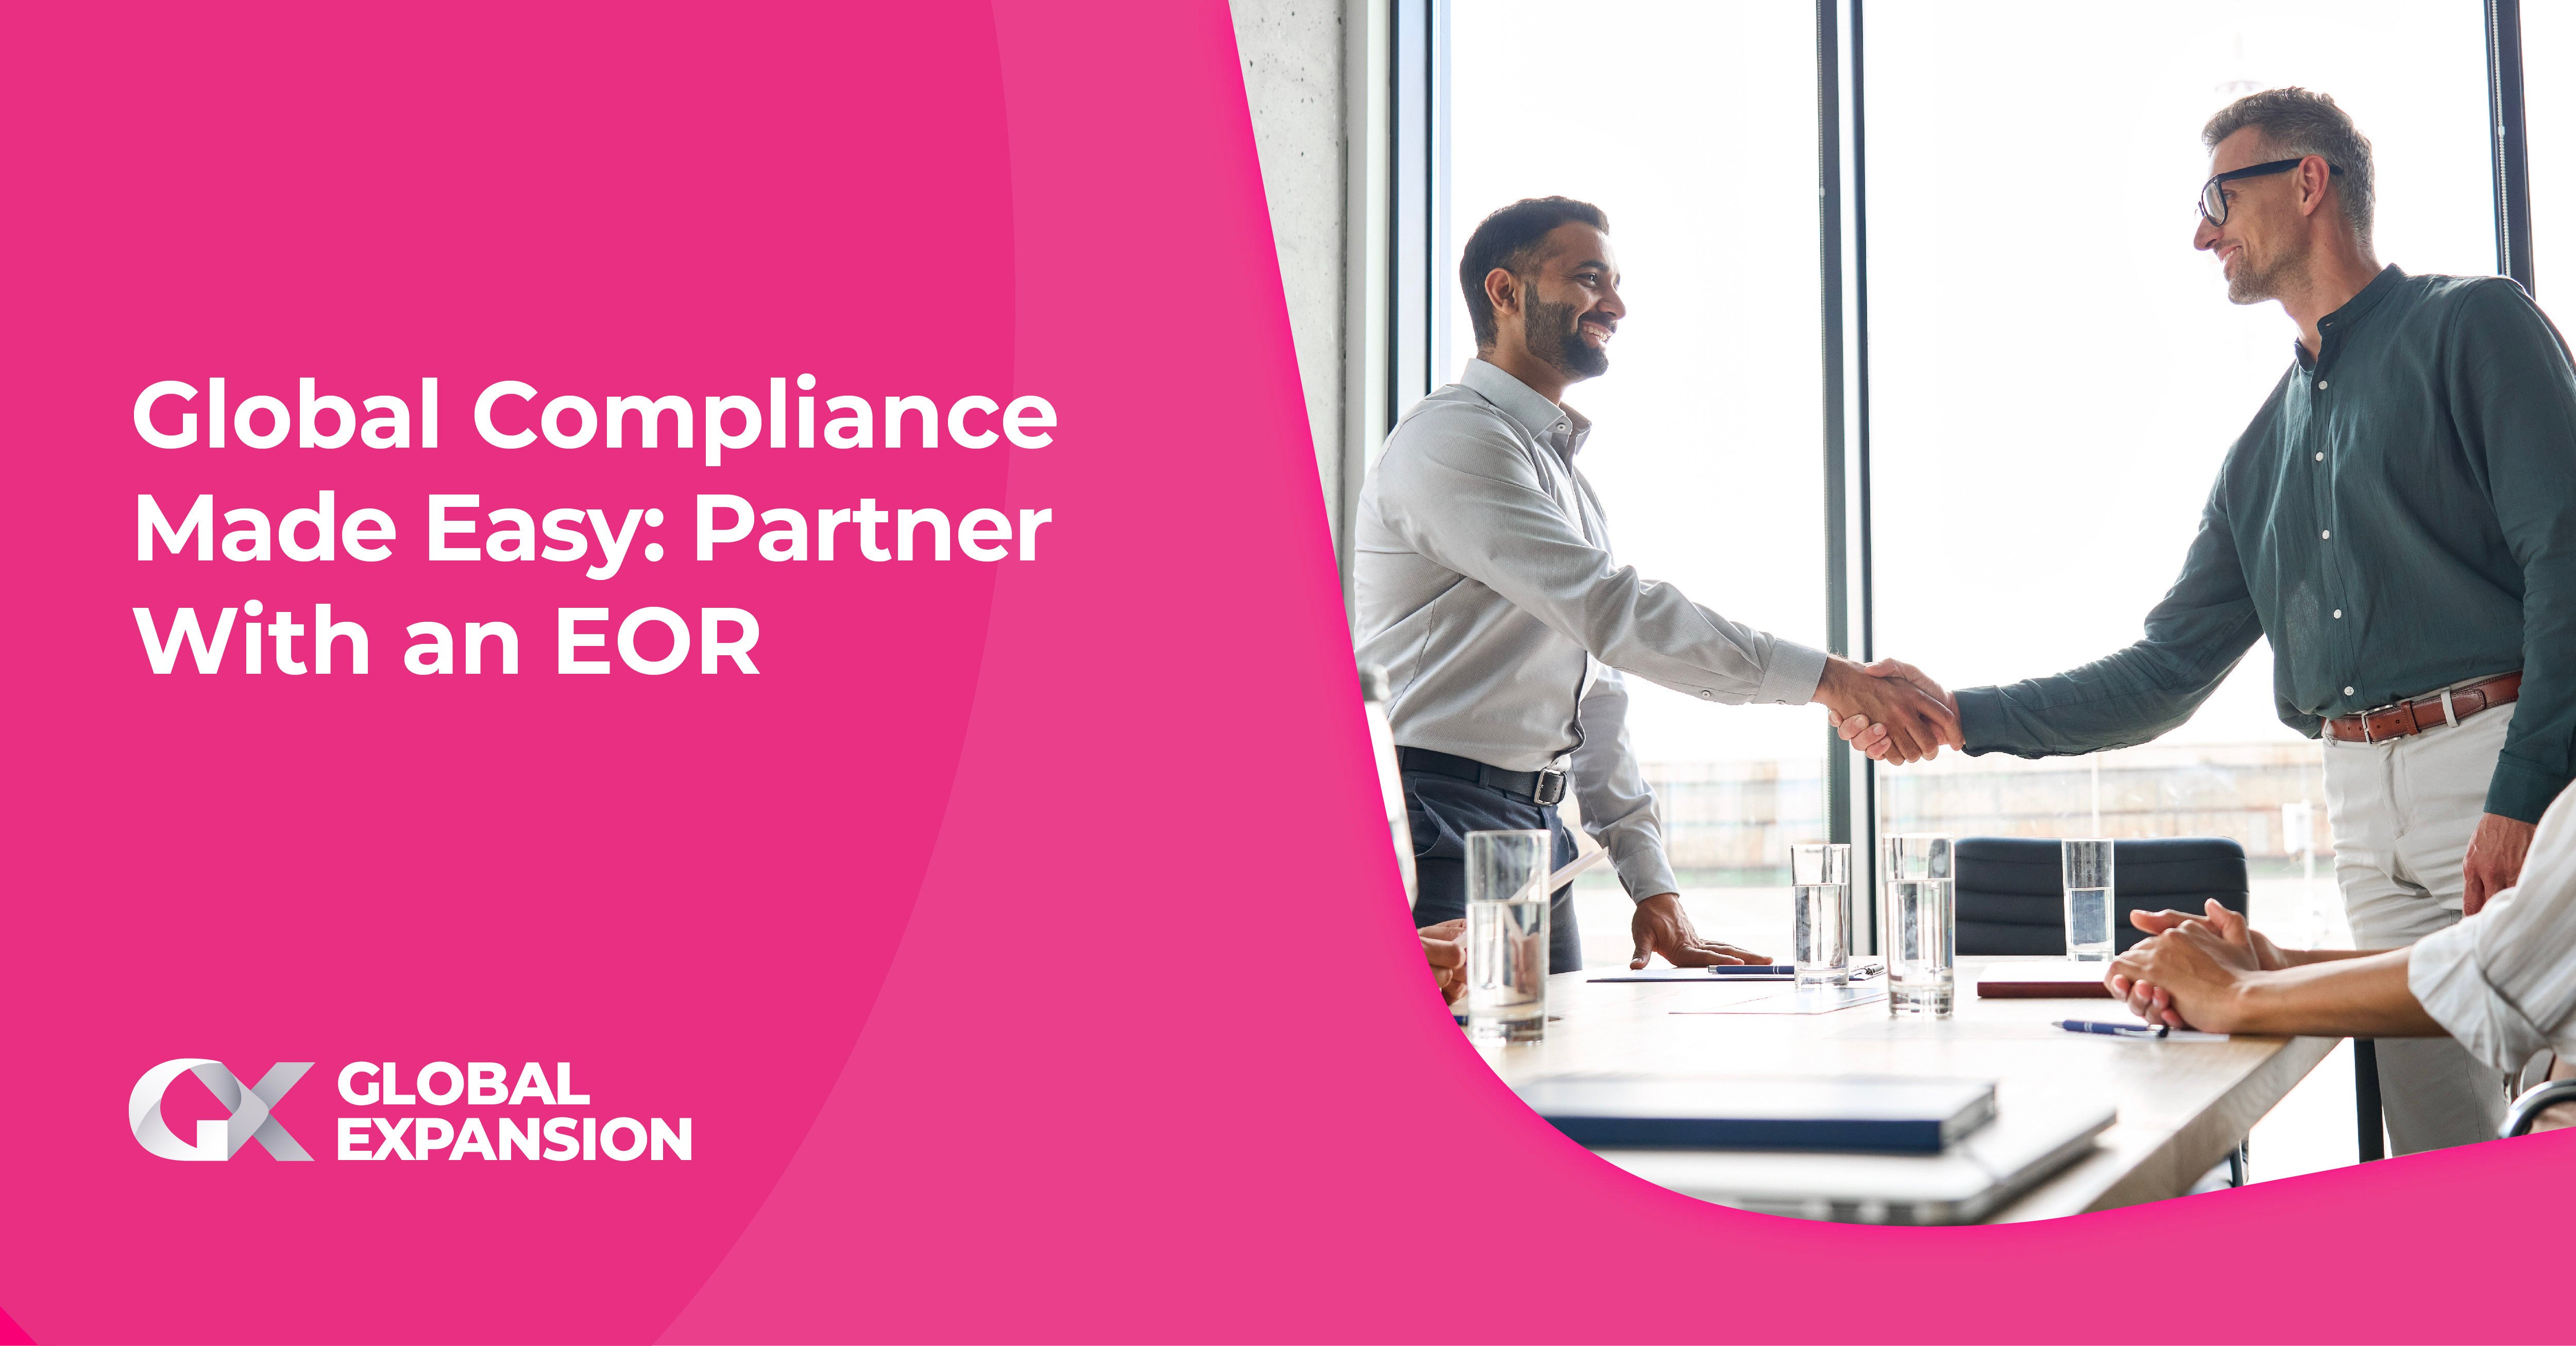 Global Compliance Made Easy: Partner With an EOR